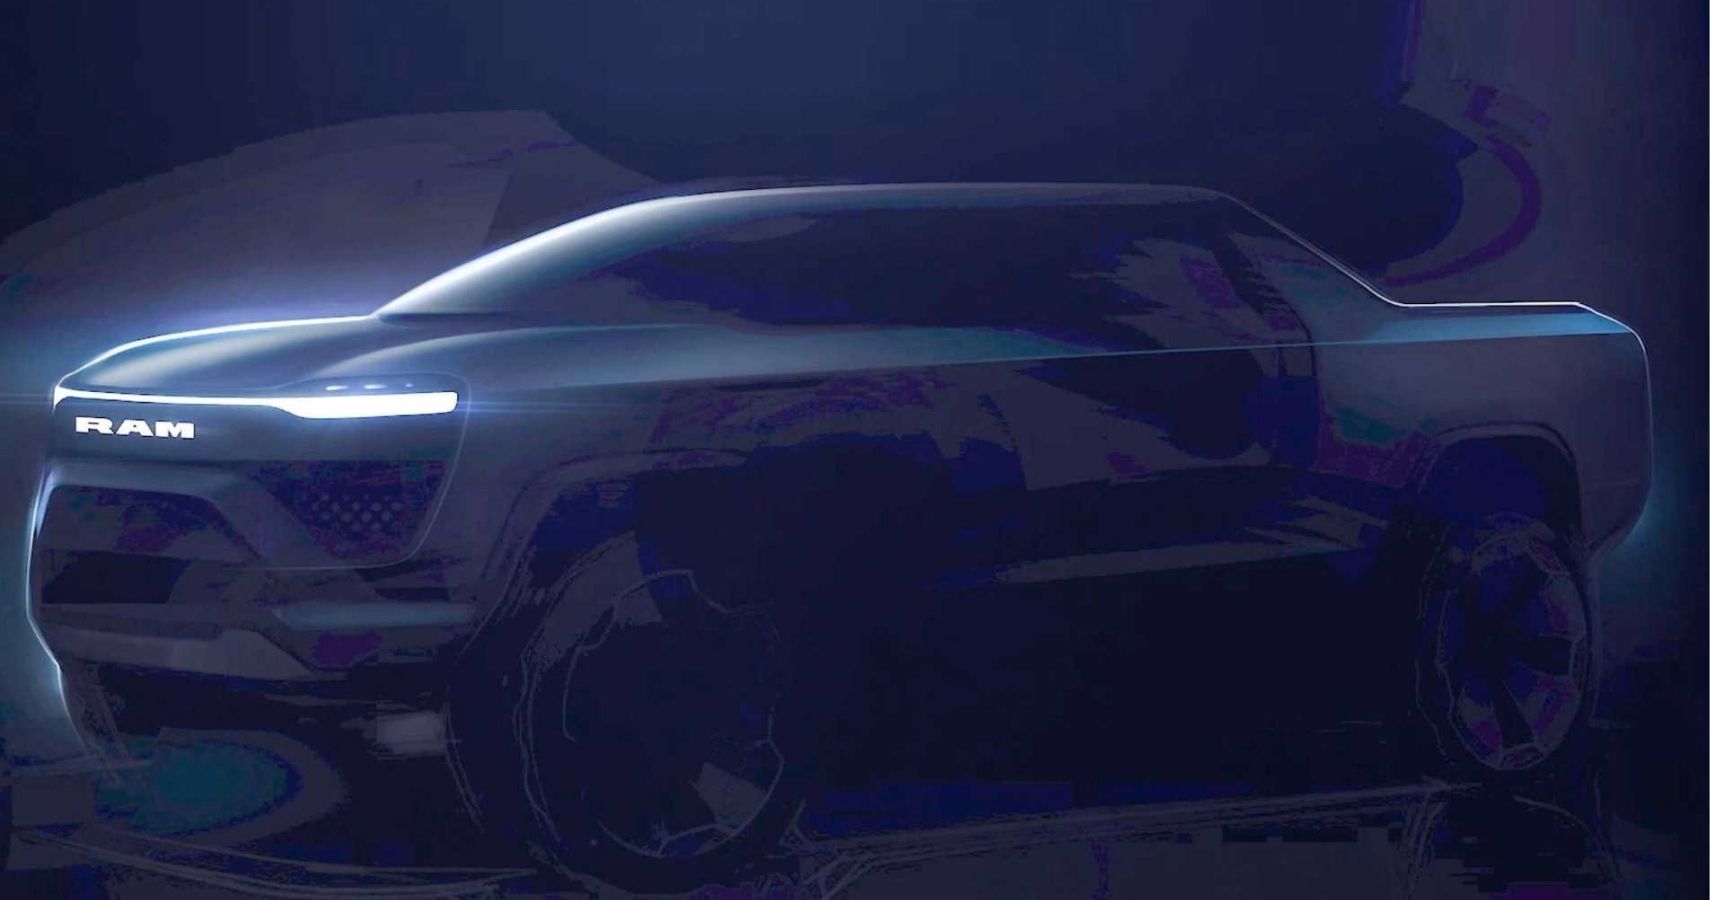 Ram Shares First Glimpse Of Its Electric Pickup Truck